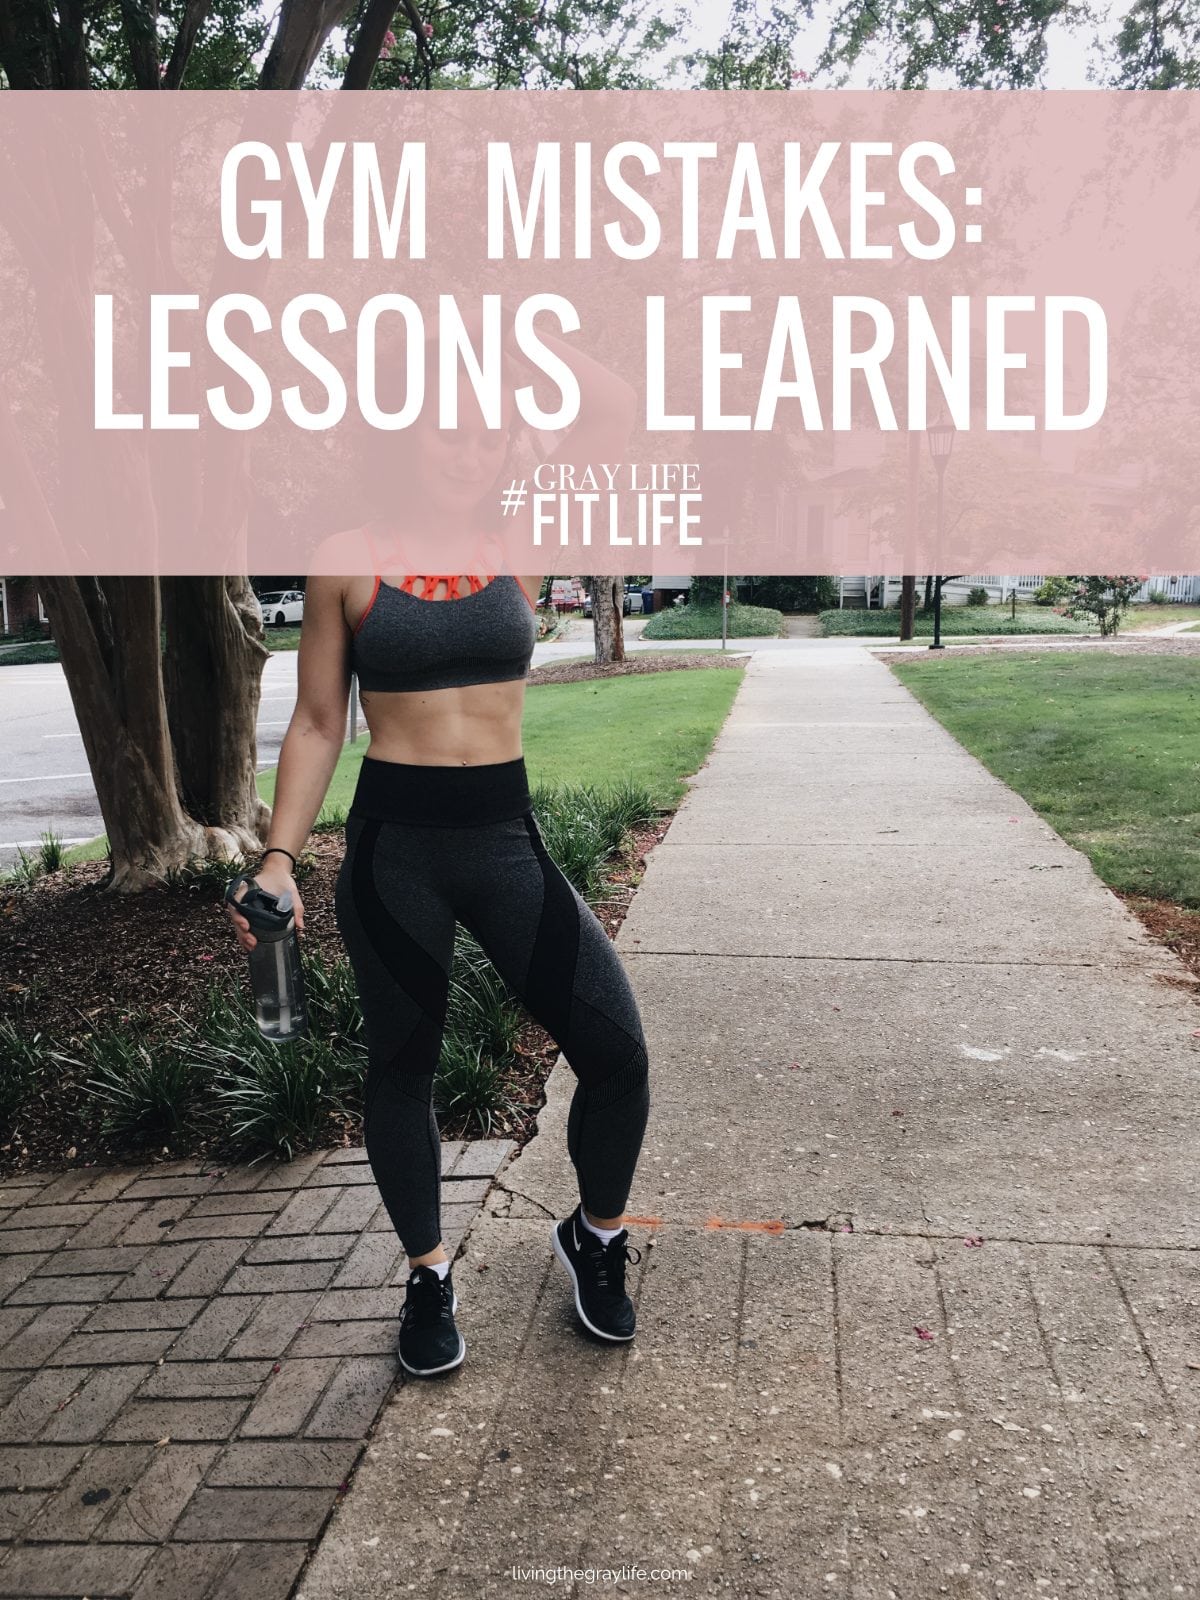 We all make mistakes. We're all human. Here's a list of gym mistakes I've made to hopefully keep you from doing the same!